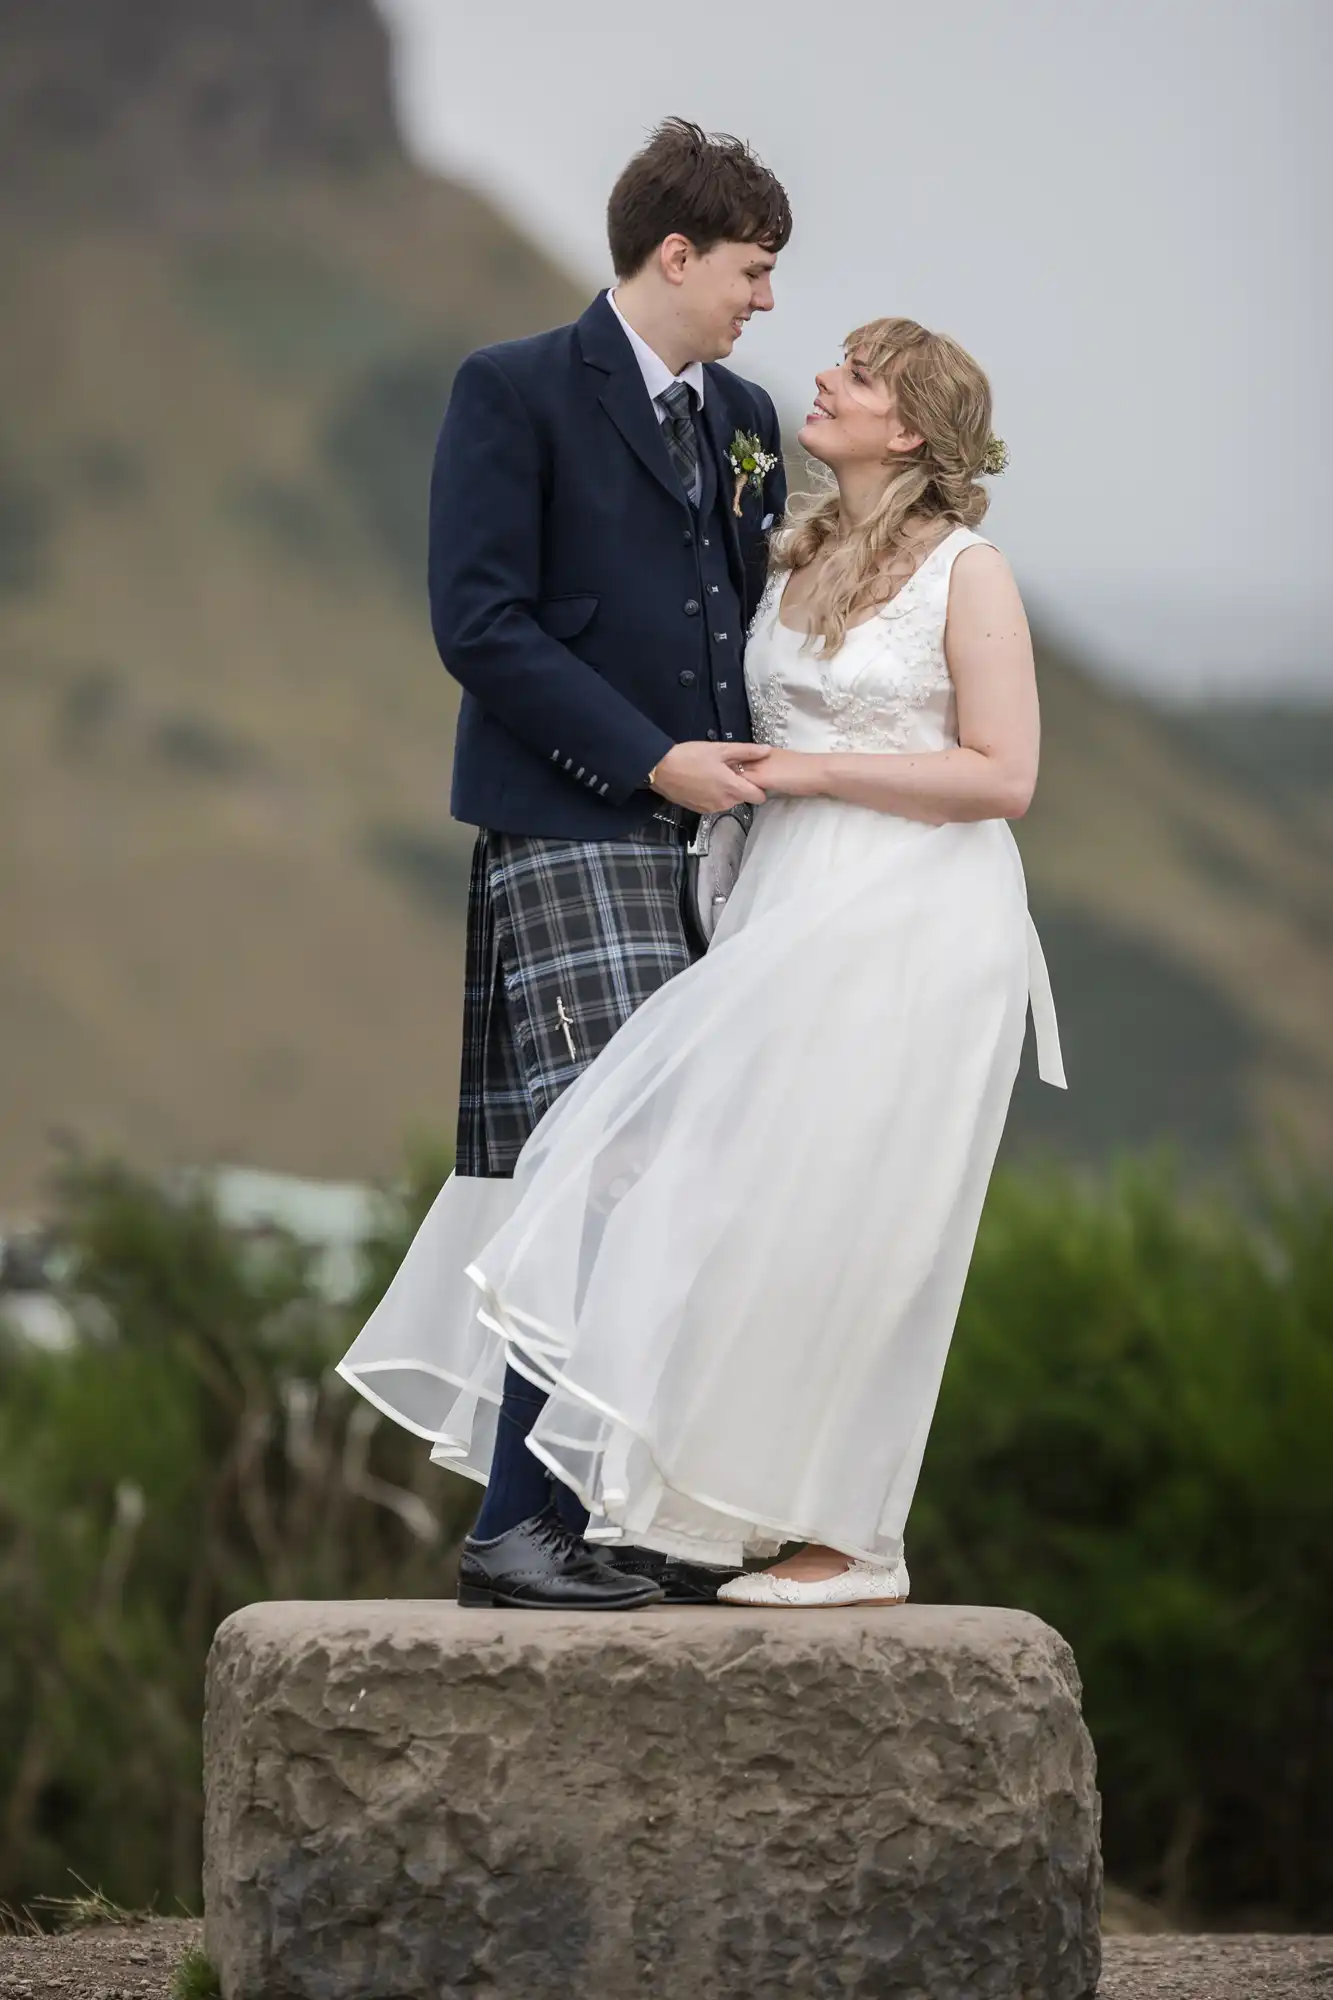 A bride and groom in wedding attire stand on a stone, facing each other with a mountainous backdrop.